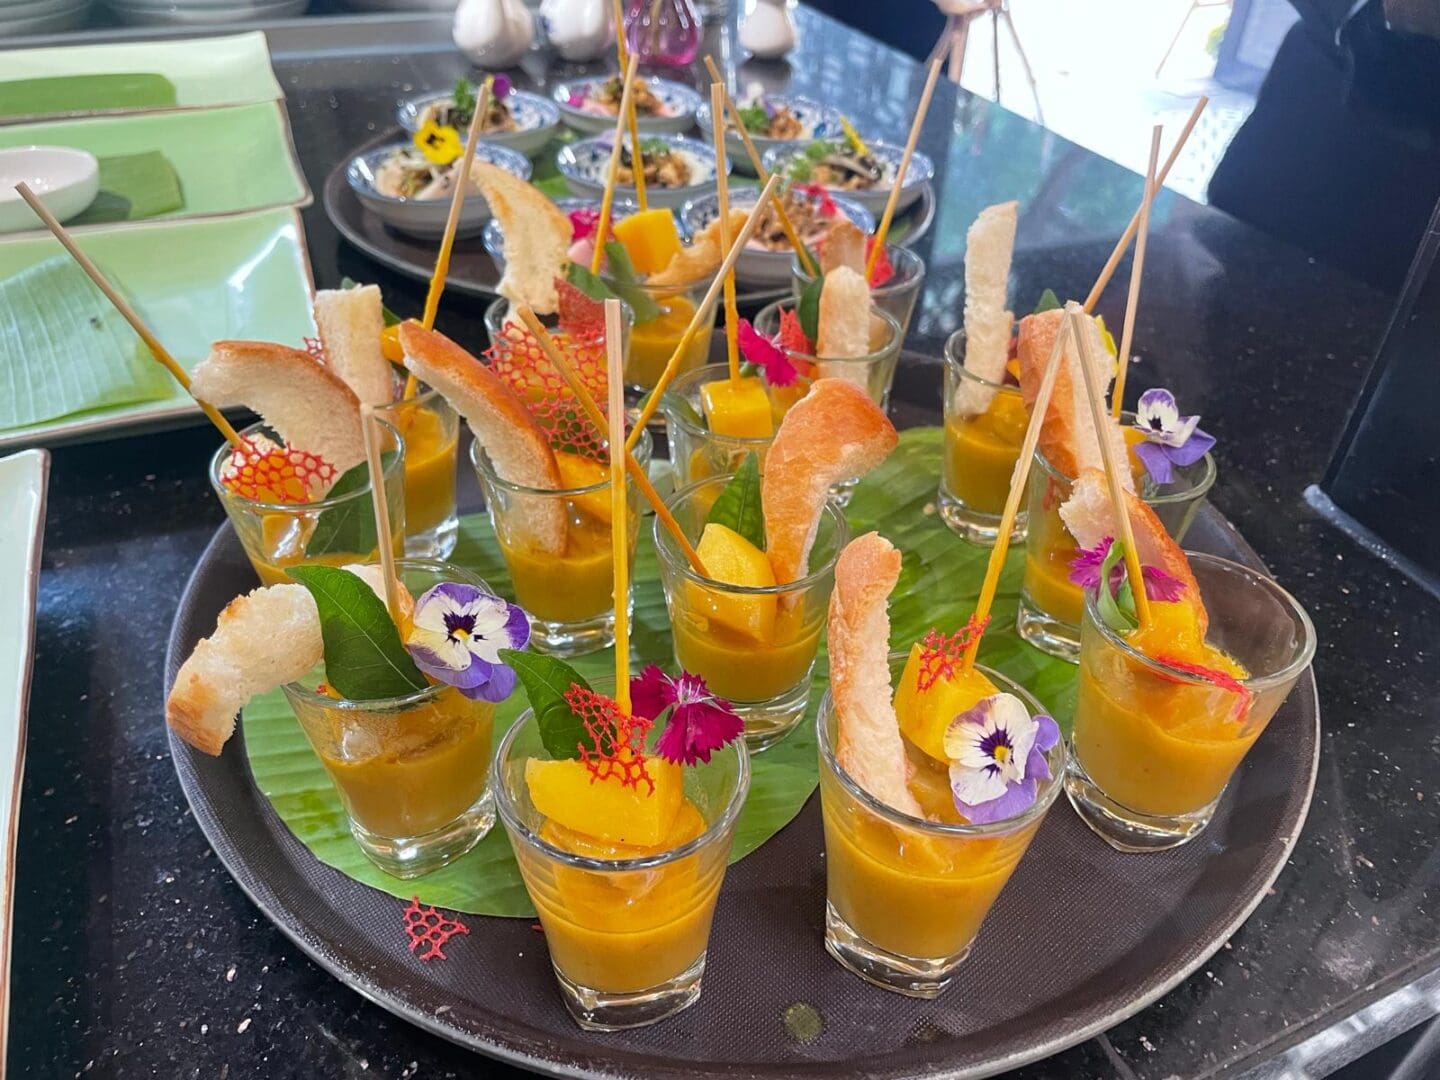 Yellow soup shooters with bread and flowers.